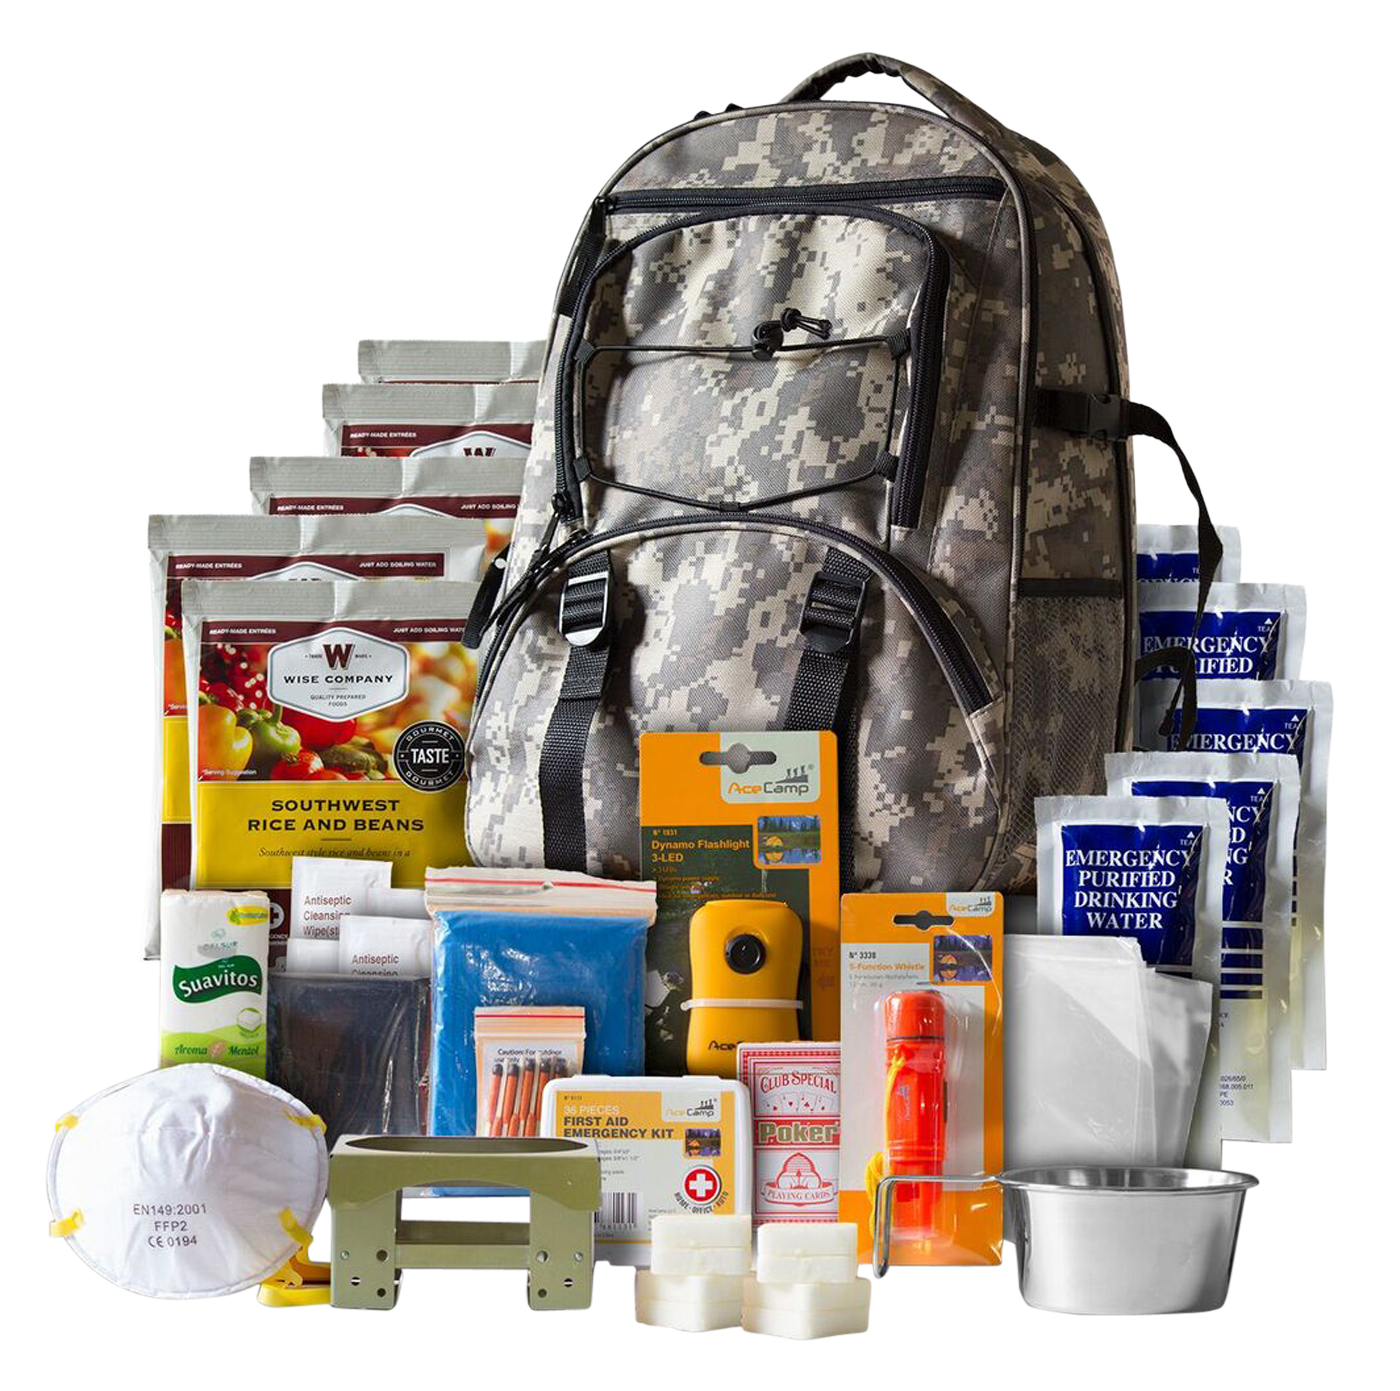 Wise Foods 5-day Survivial, Wise Rw01-622gsg 64 Piece Survival Back Pack